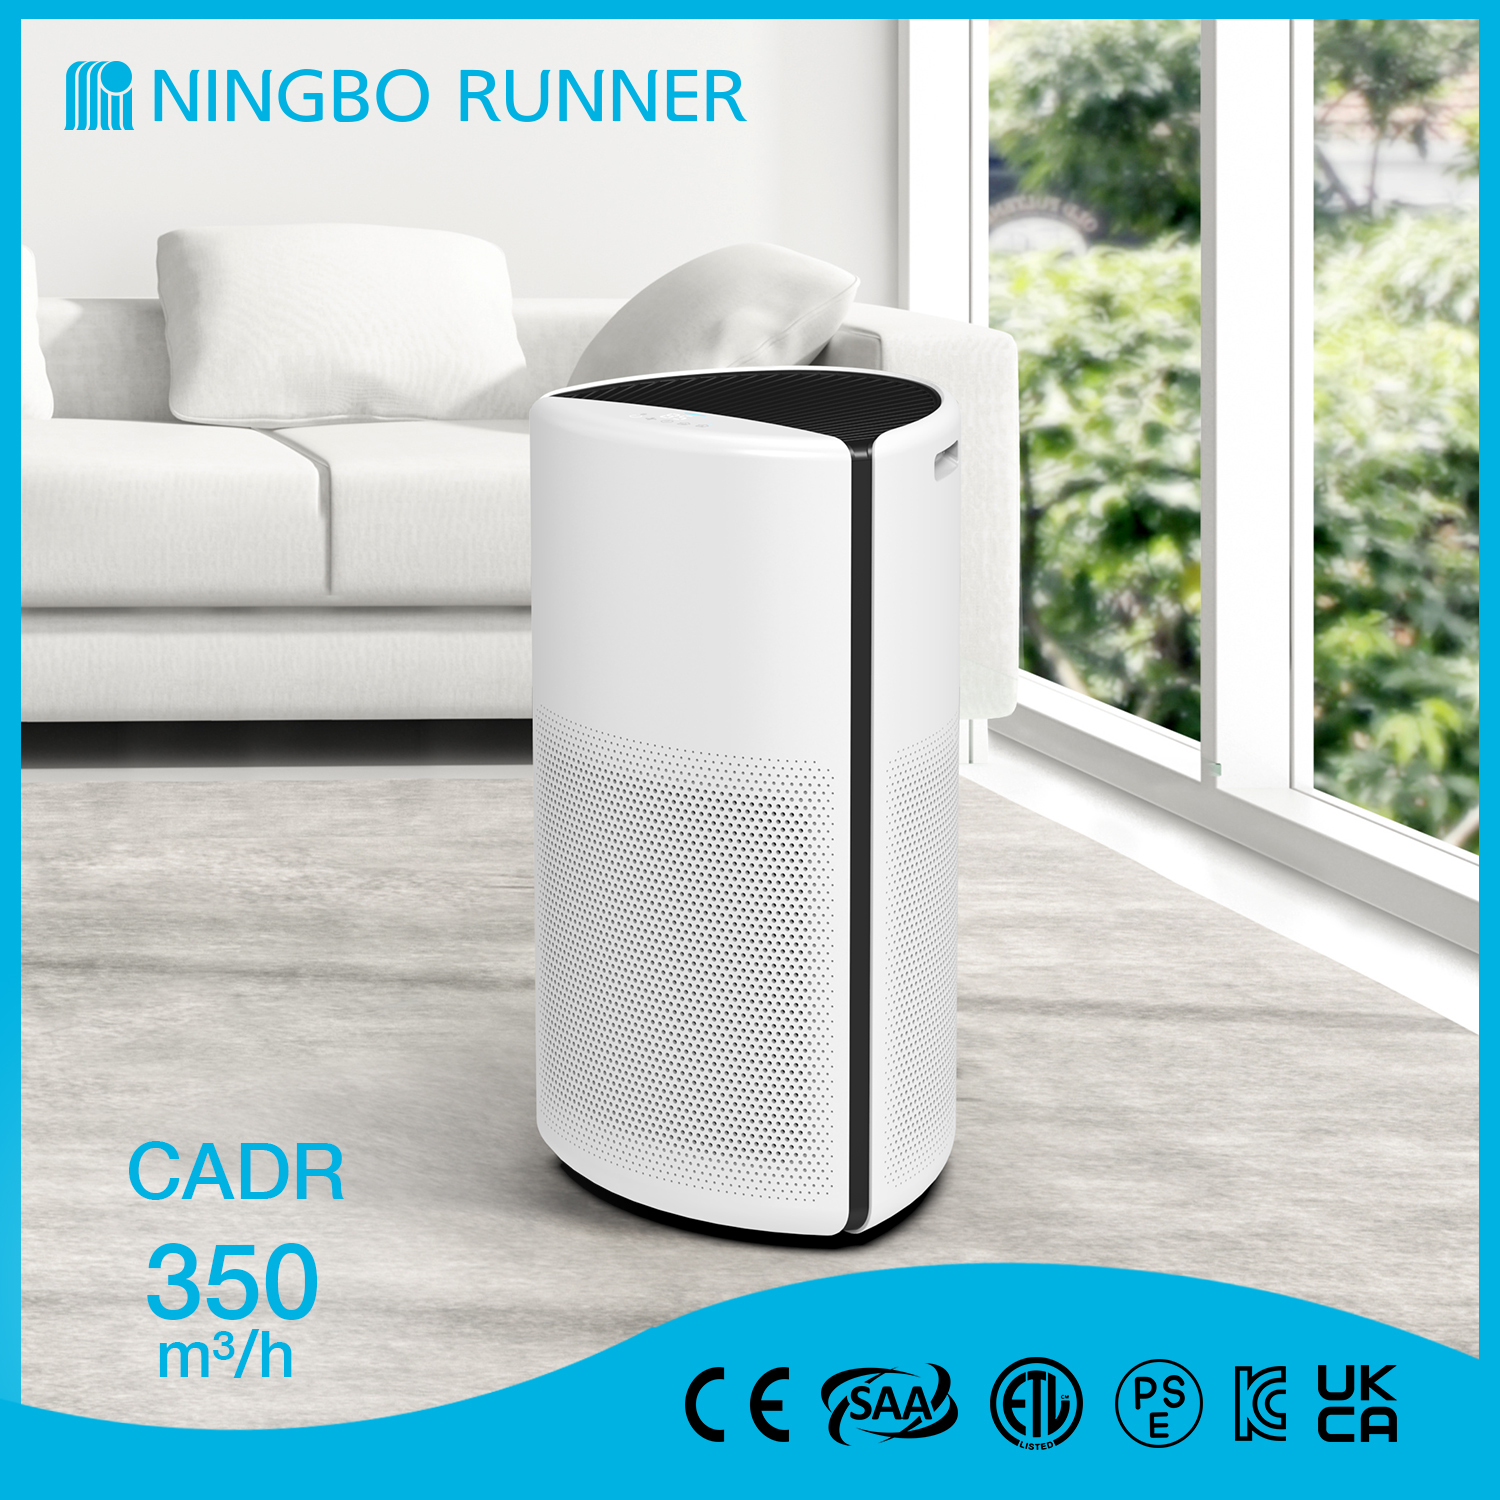 High Quality Portable with UVC Light and HEPA Filter Home Air Purifier Featured Image